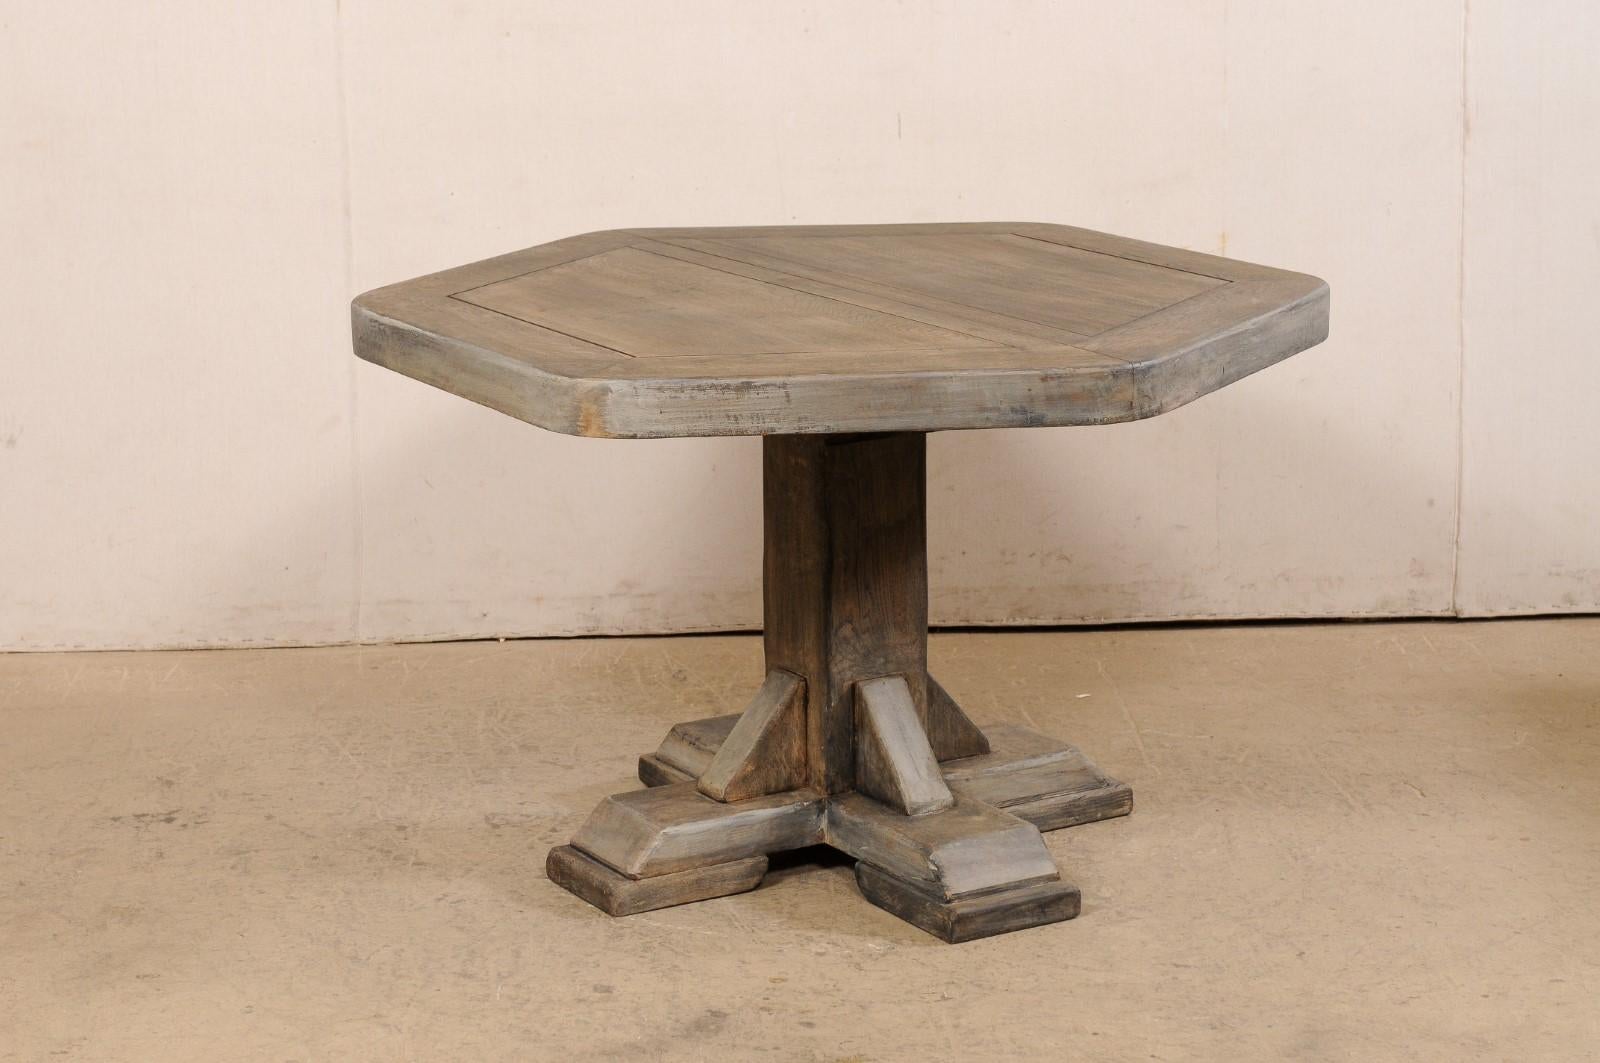 European Hexagon-Shaped Wooden Pedestal Table, Mid 20th century For Sale 2